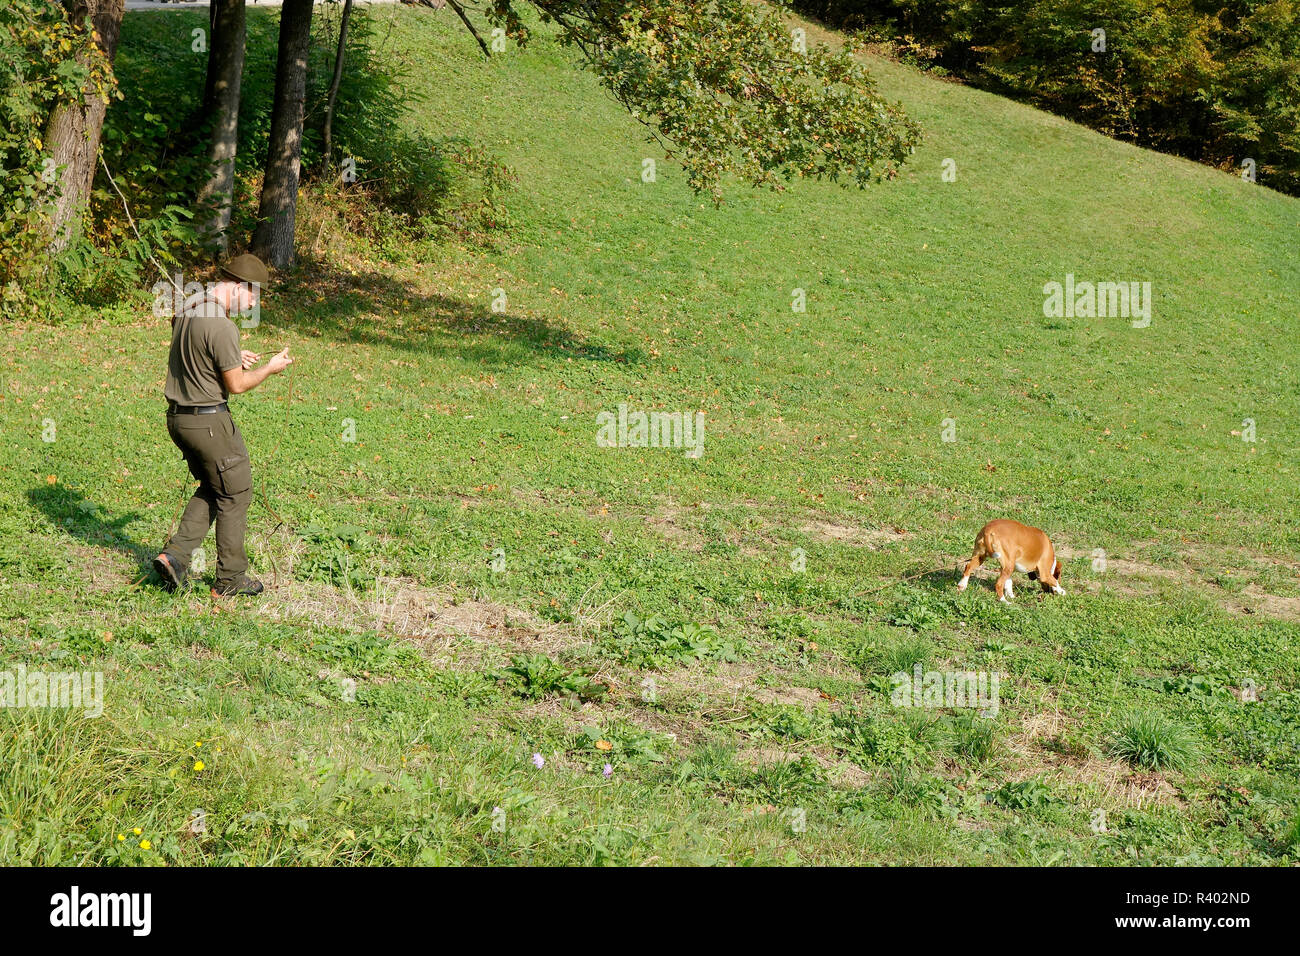 A hunter with a tracking hound on work. Stock Photo